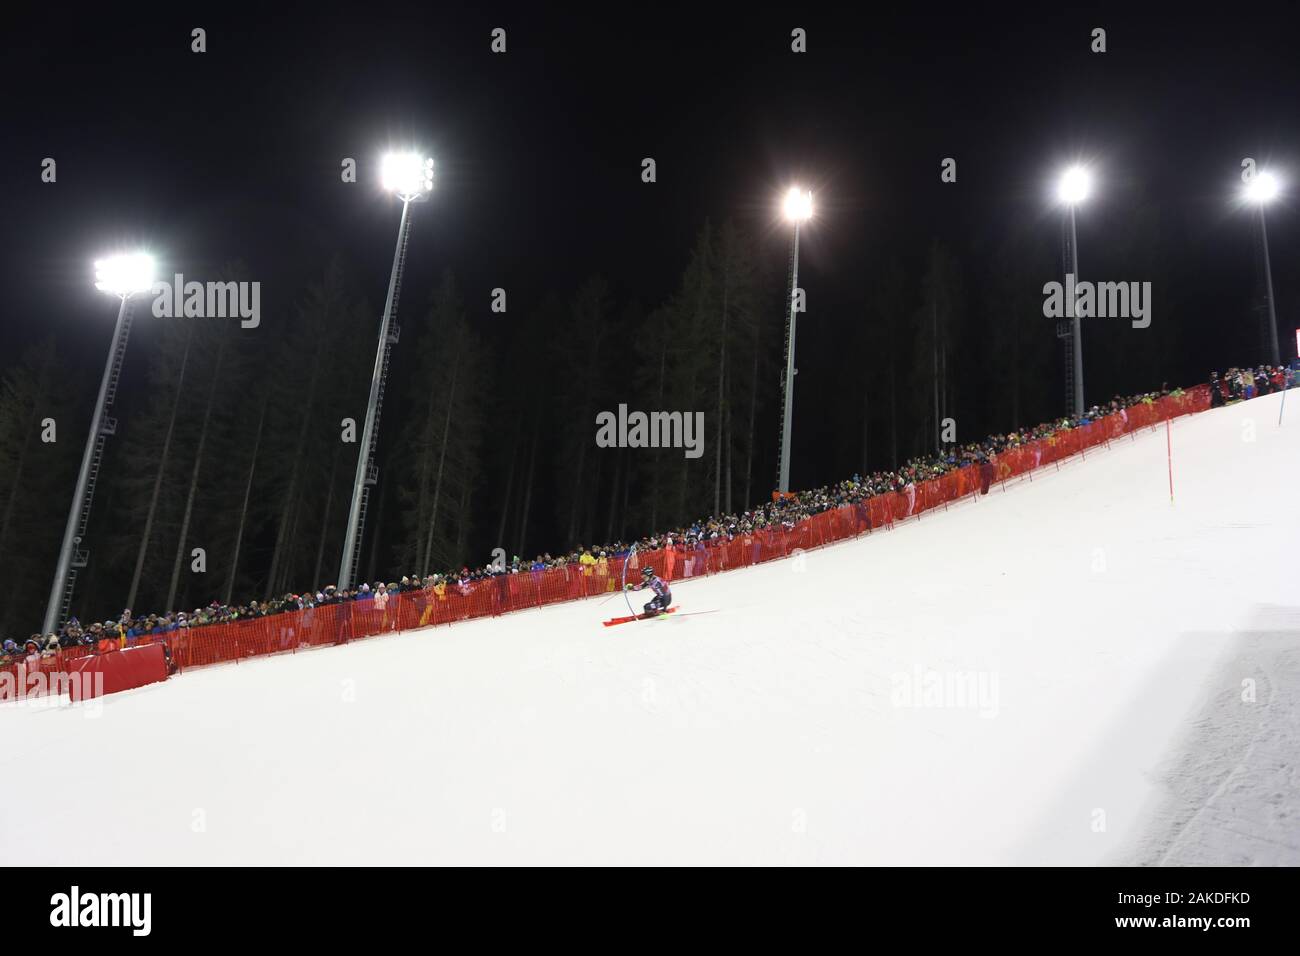 FIS Alpine Ski World Cup Men's Night Slalom in Madonna di Campiglio, Italy on January 8, 2020, Stefan Hadalin (SLO) in action. Photo: Pierre Teyssot/Espa-Images Stock Photo